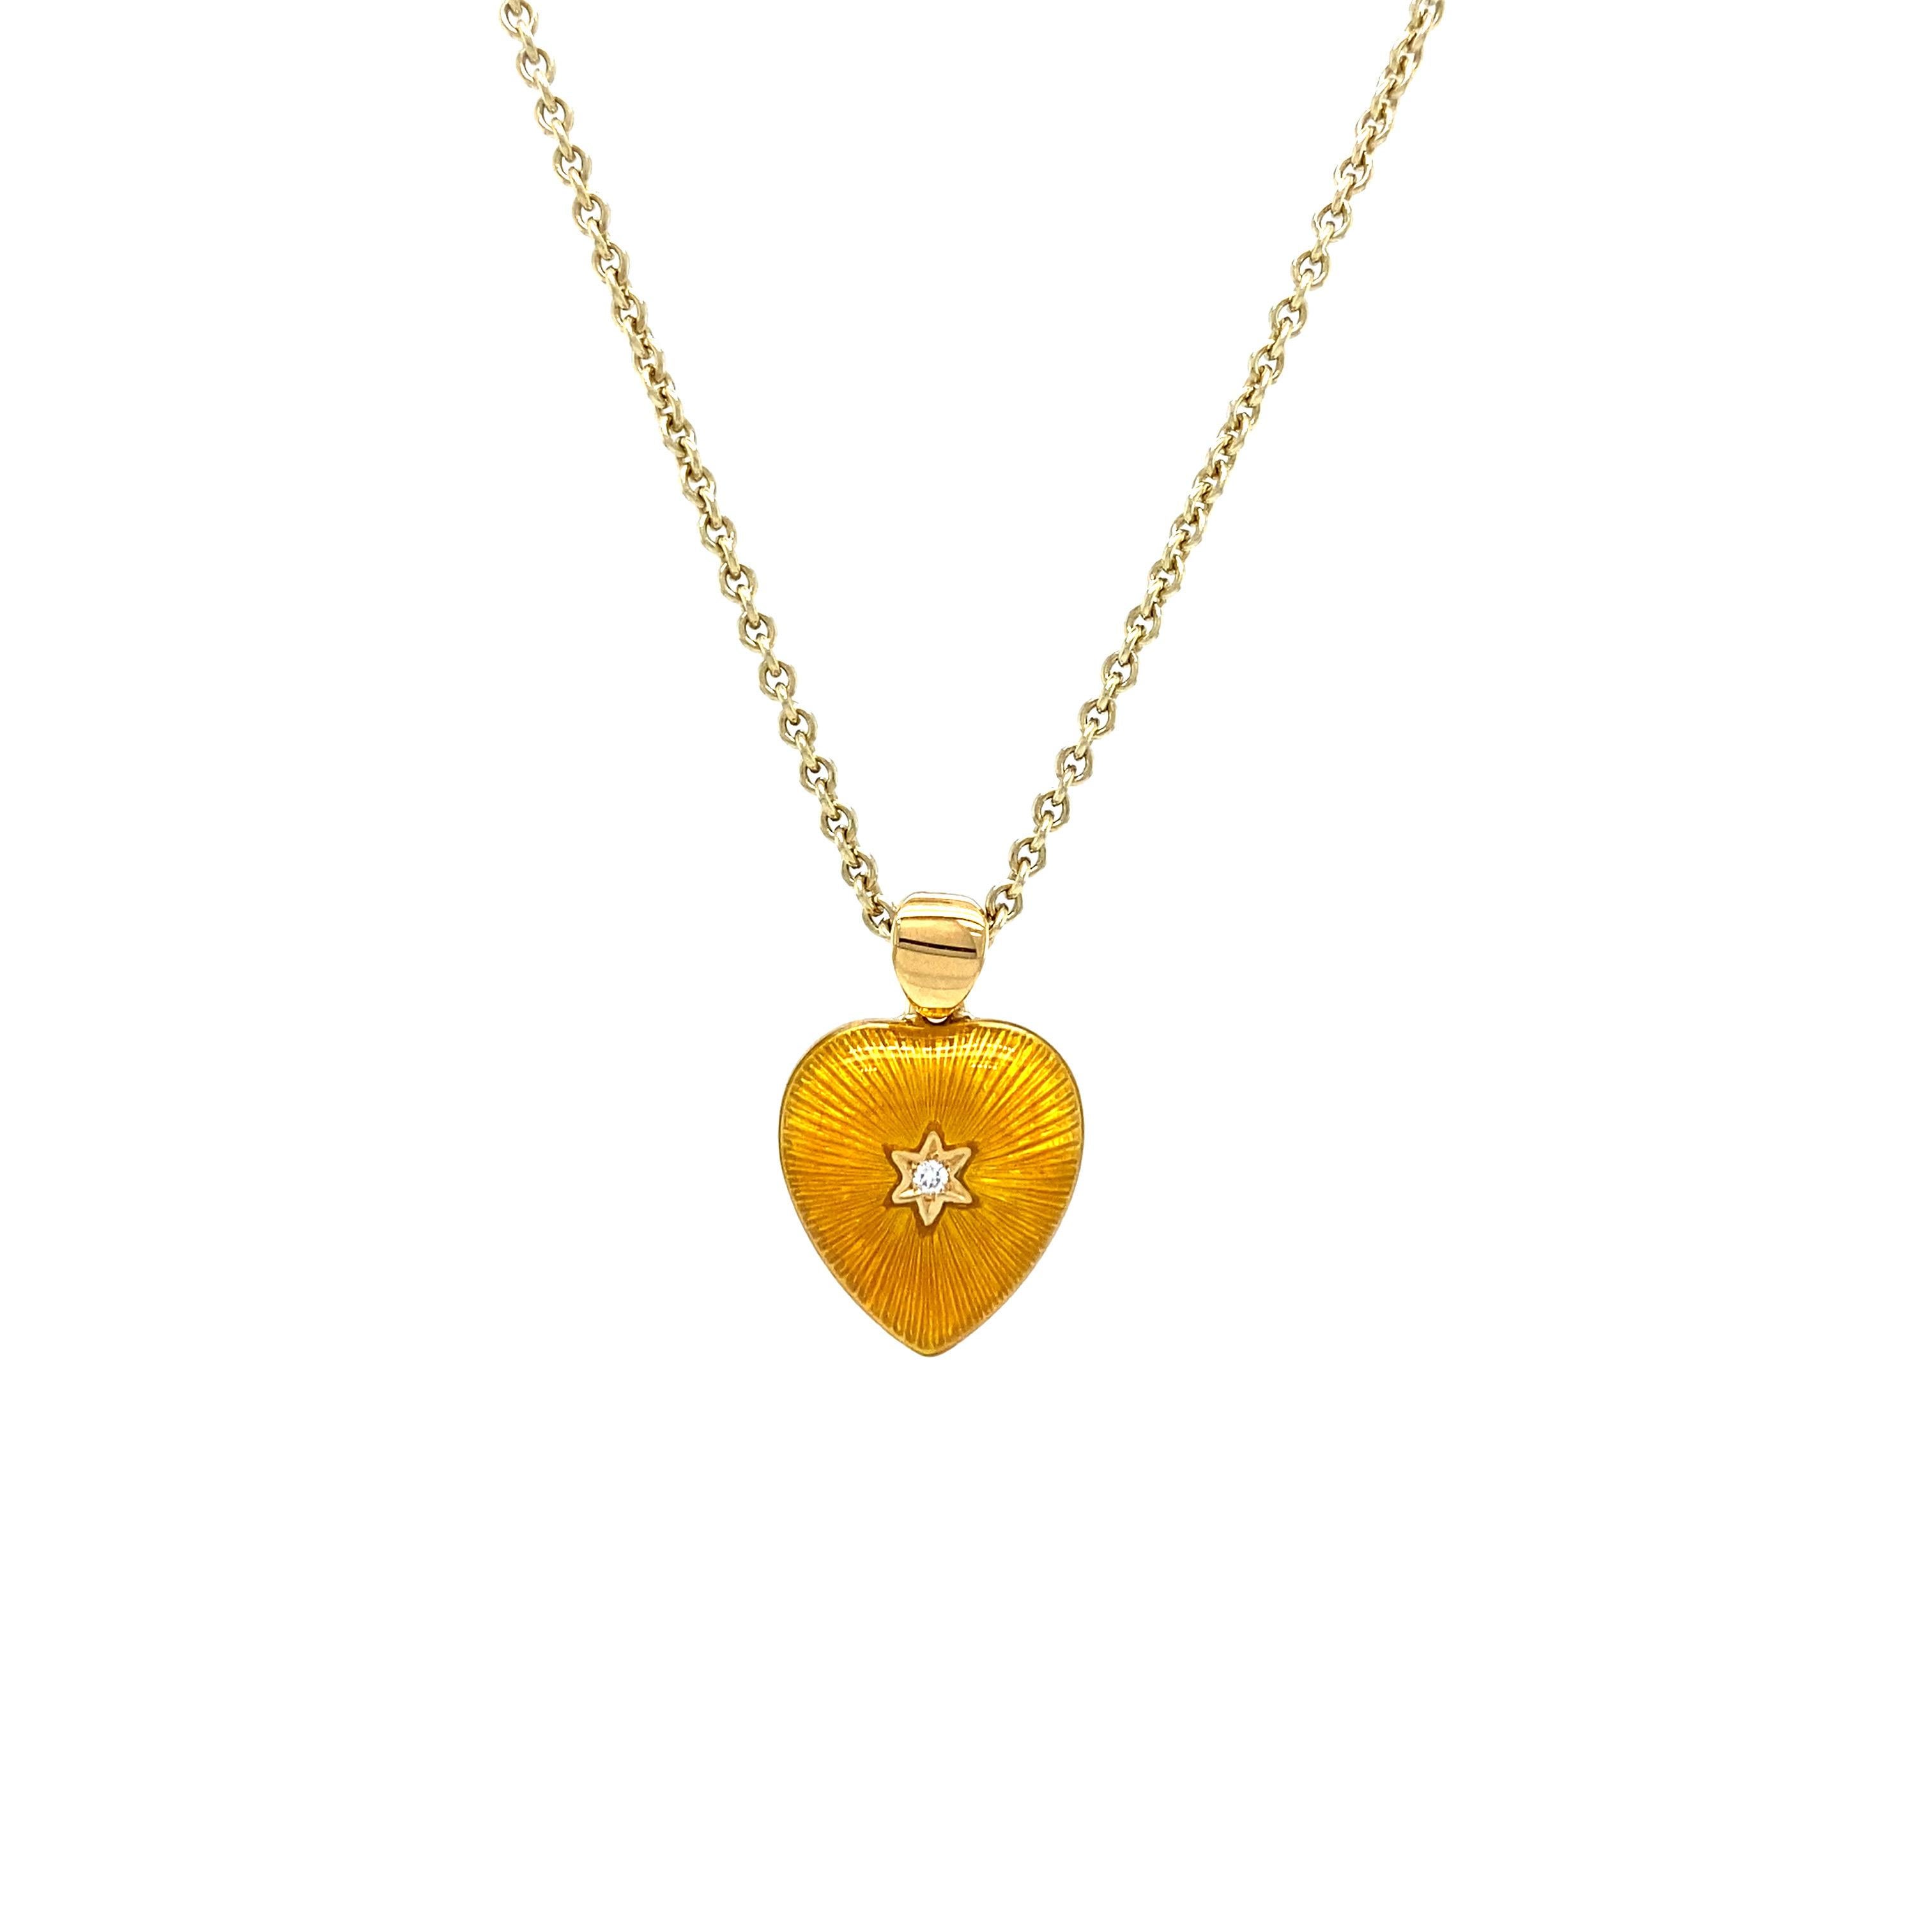 Brilliant Cut Two Colored Heart Pendant 18k Yellow Gold Green/Yellow Enamel 2 Diamonds 2.02 ct For Sale